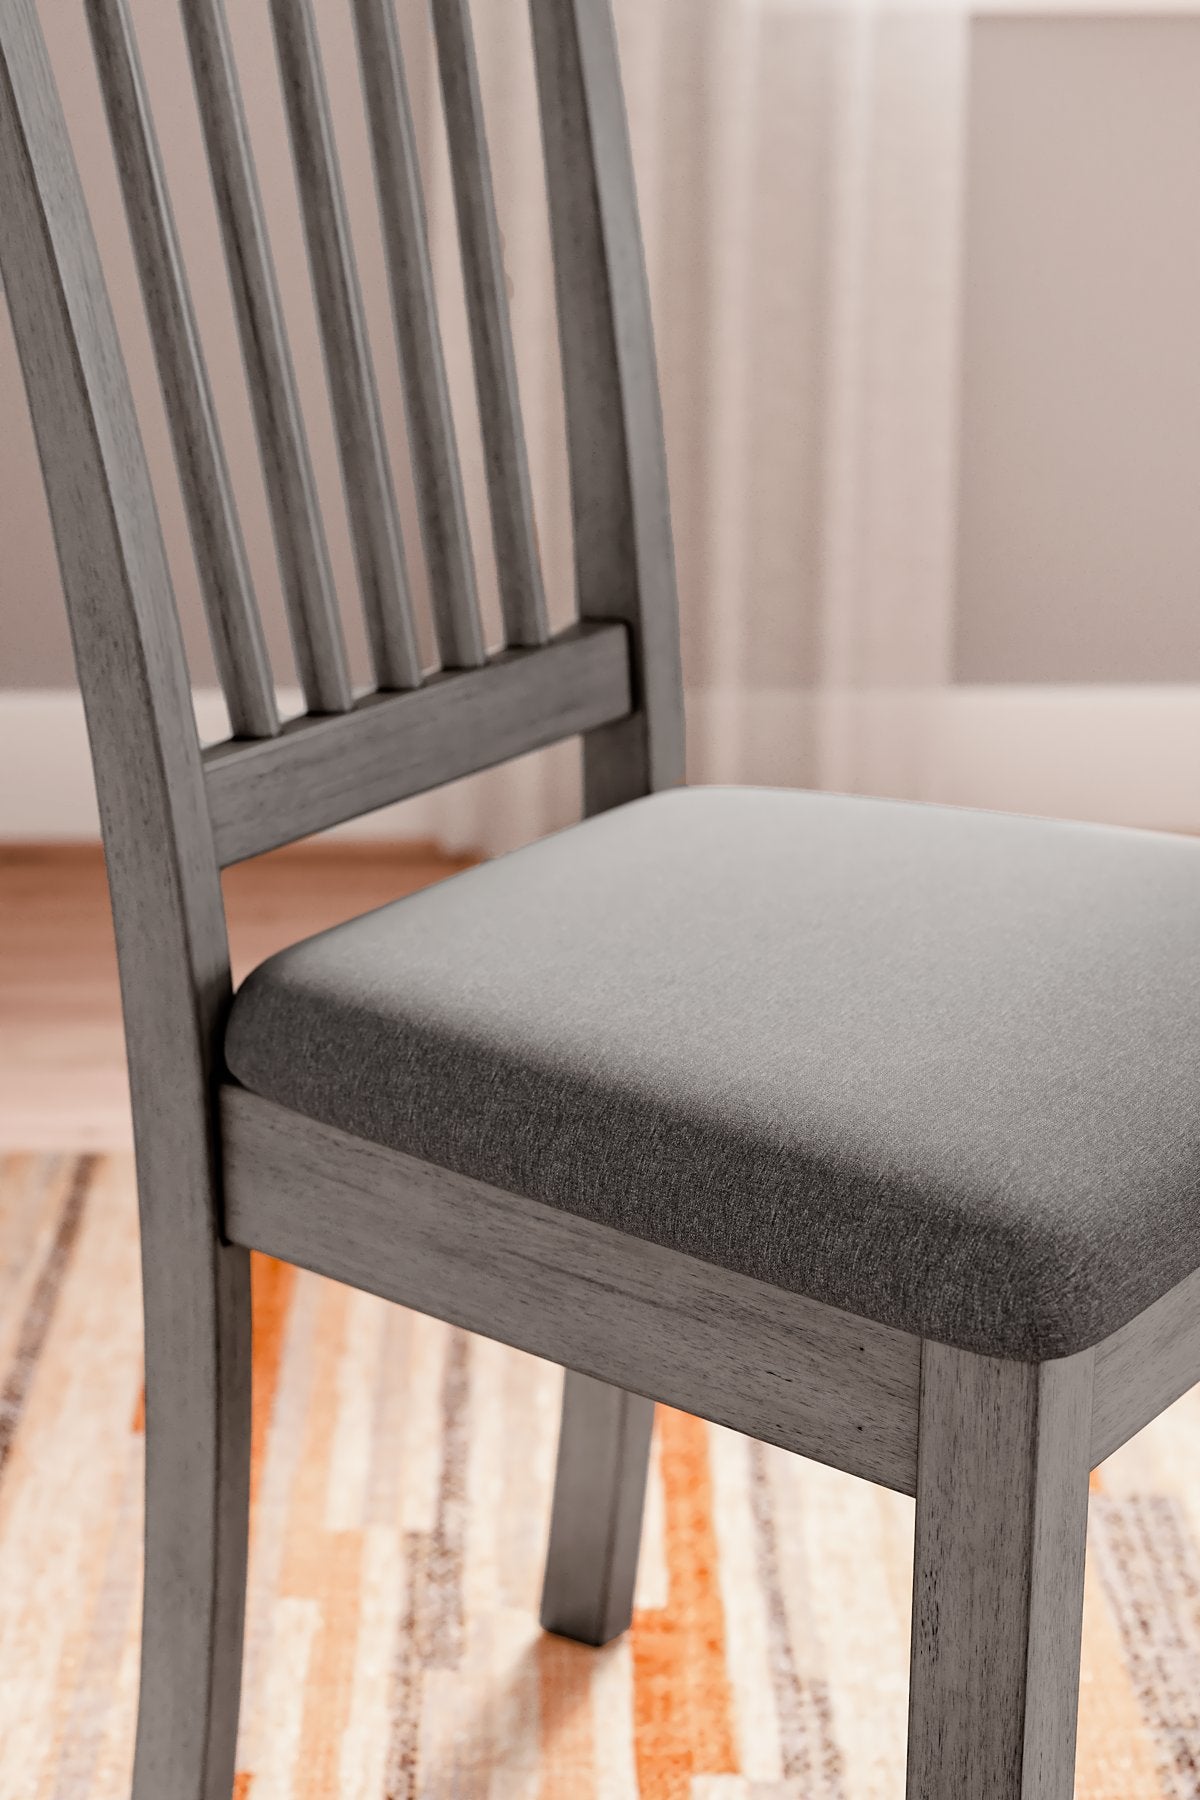 Shullden Dining Chair - Half Price Furniture